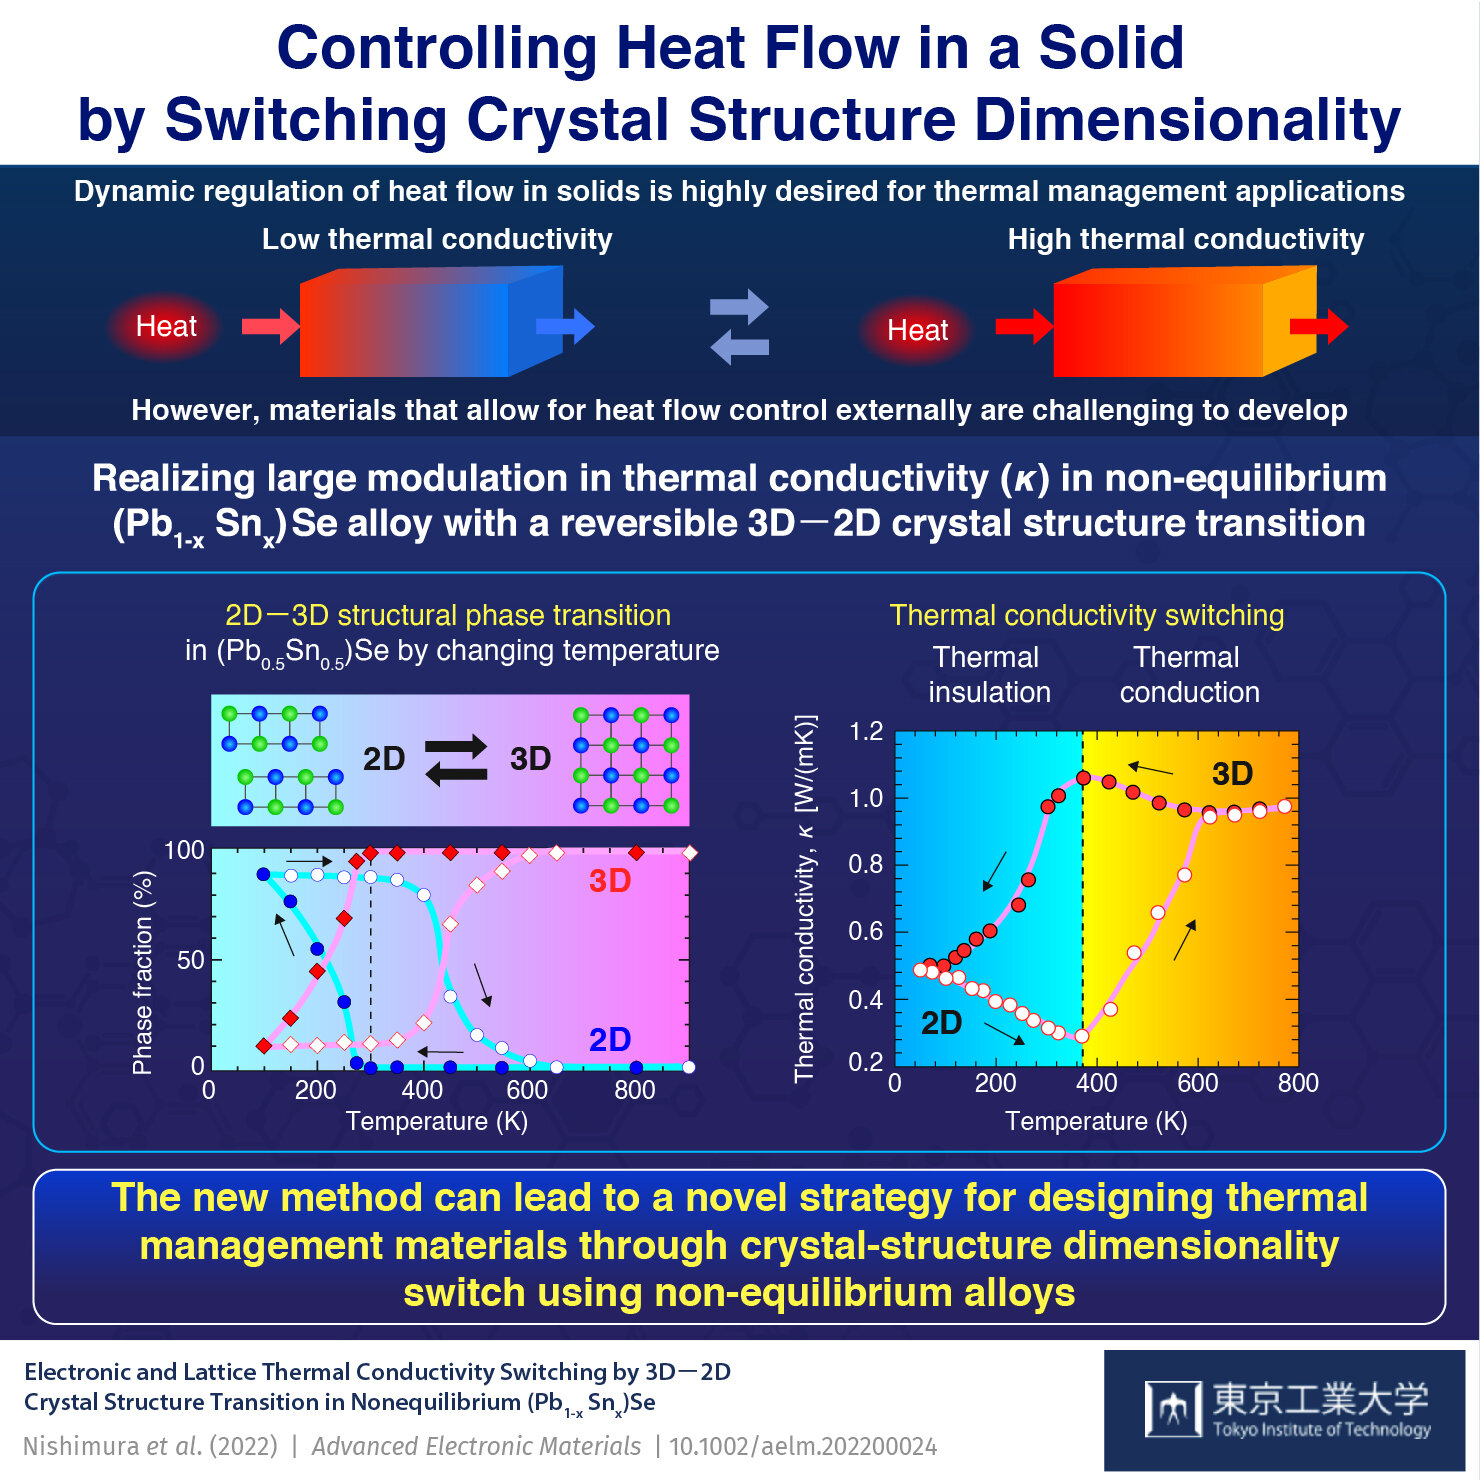 #Controlling heat flow in a solid by switching crystal structure dimensionality